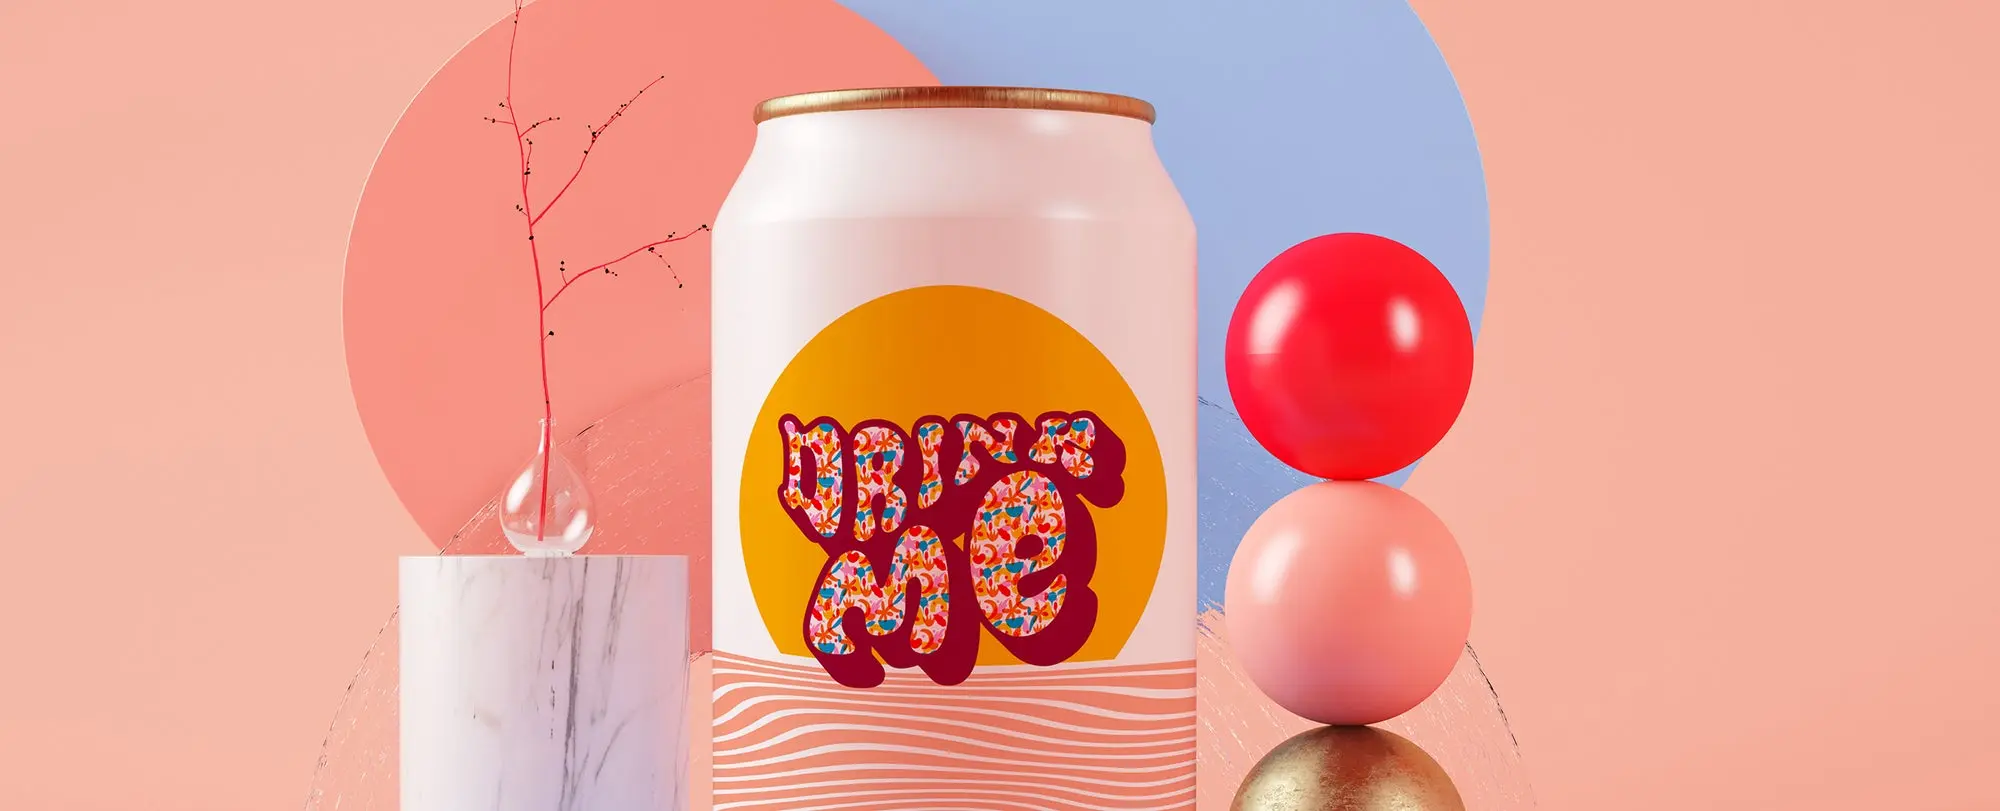 Photo of a can with funky, colorful font